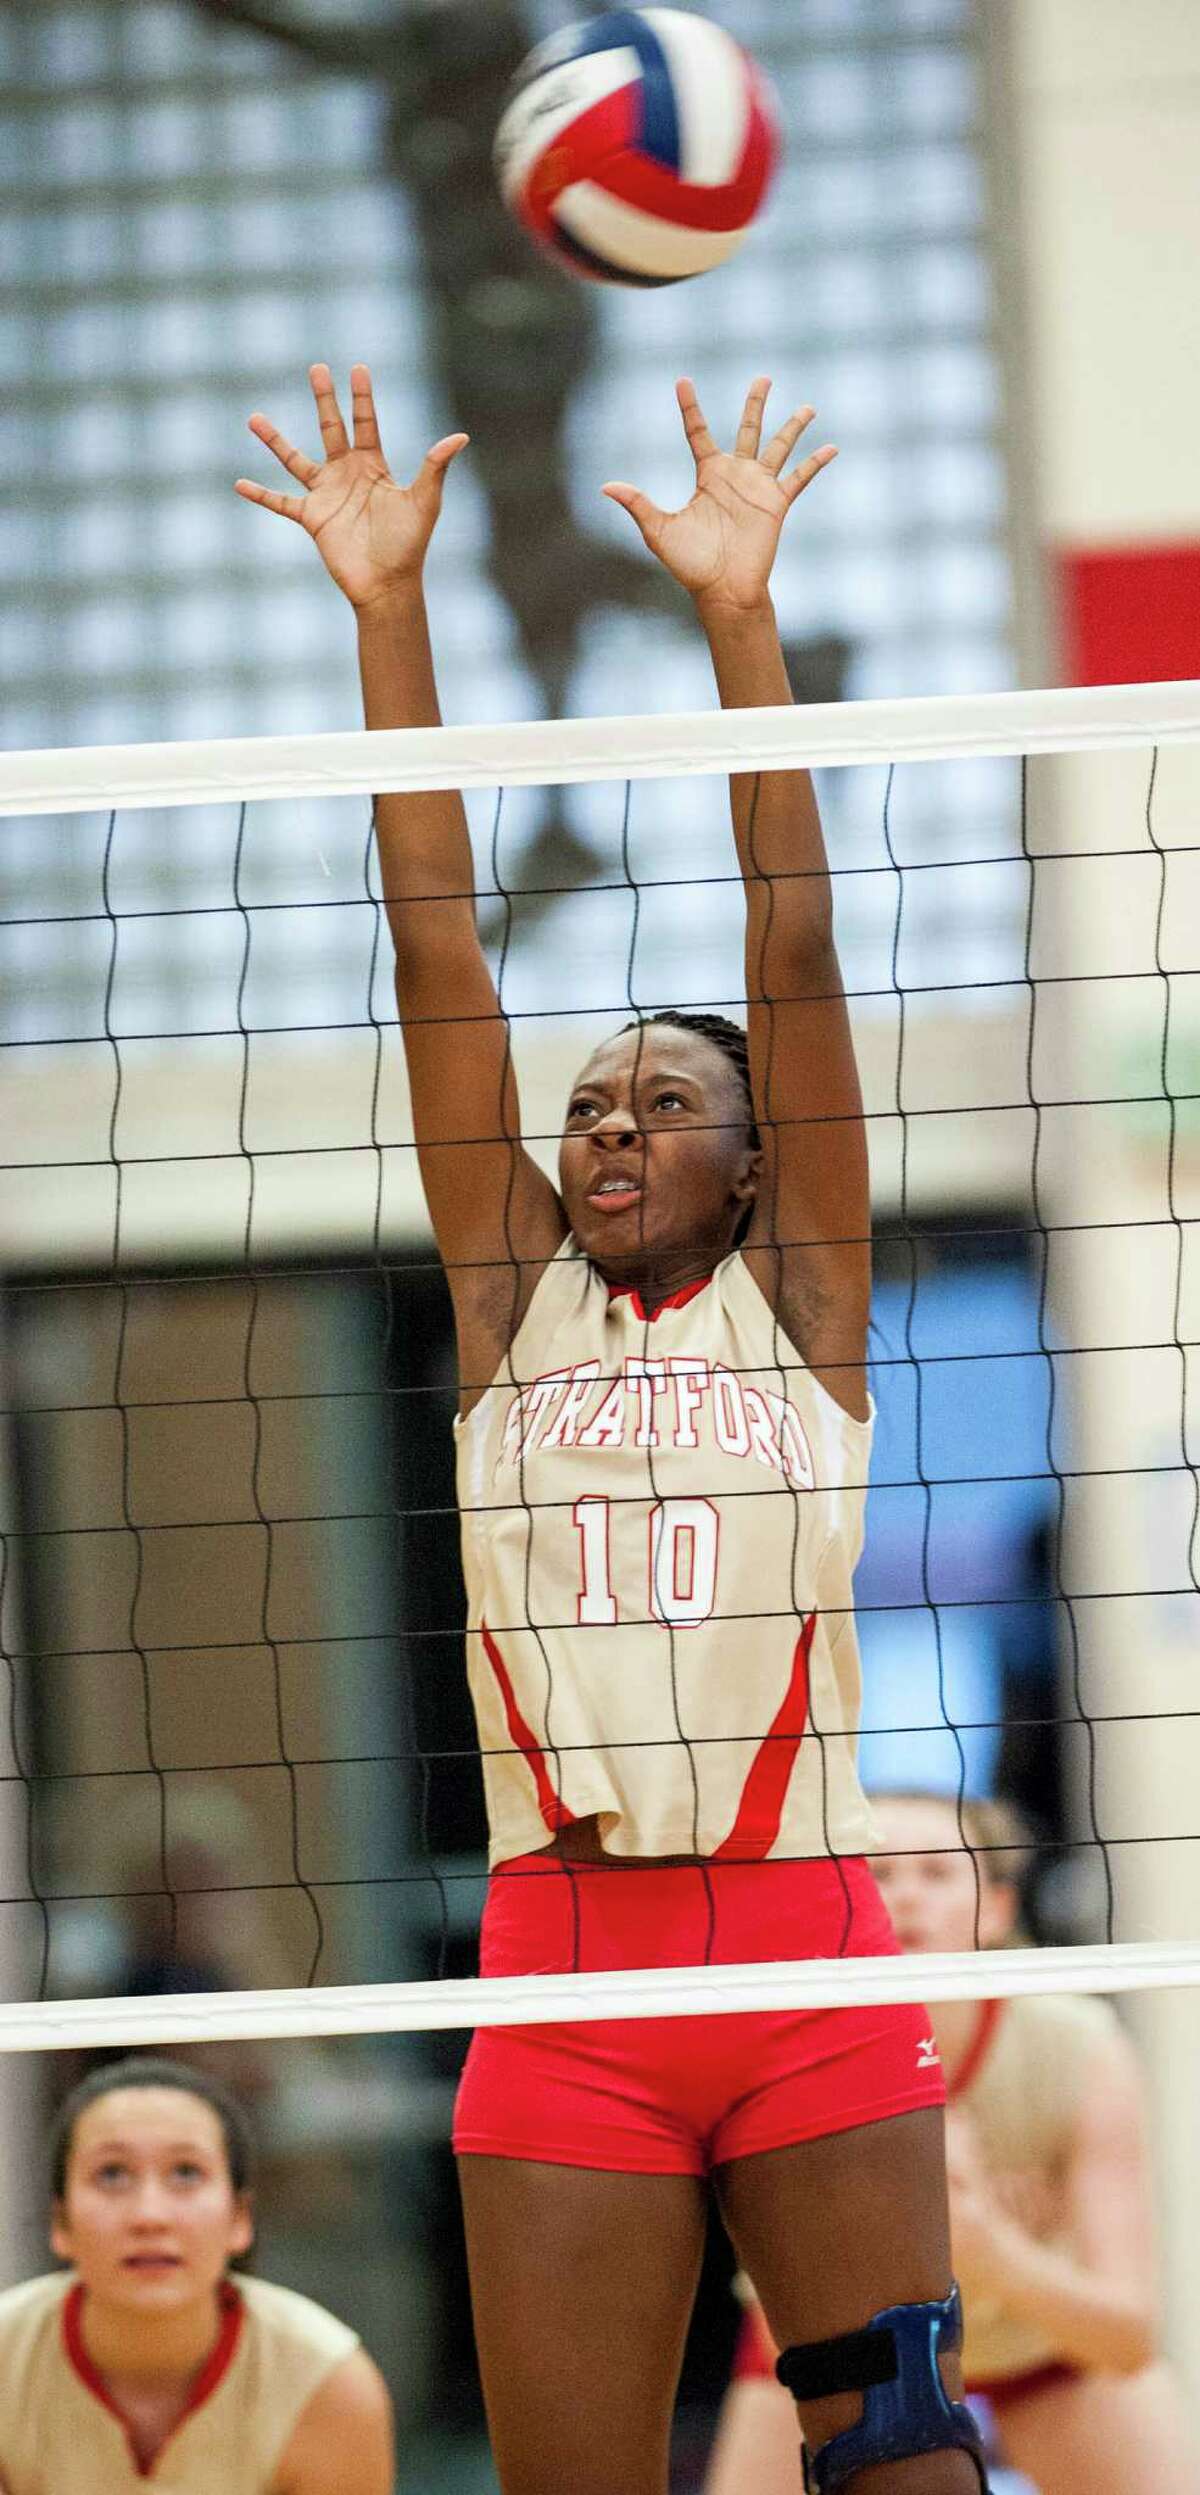 Stratford high school's Joanne Pierre-Louis goes up to try to block the ball during a girls volleyball match against Weston high school played at Stratford high school, Stratford, CT on Wednesday, October, 2nd, 2013.